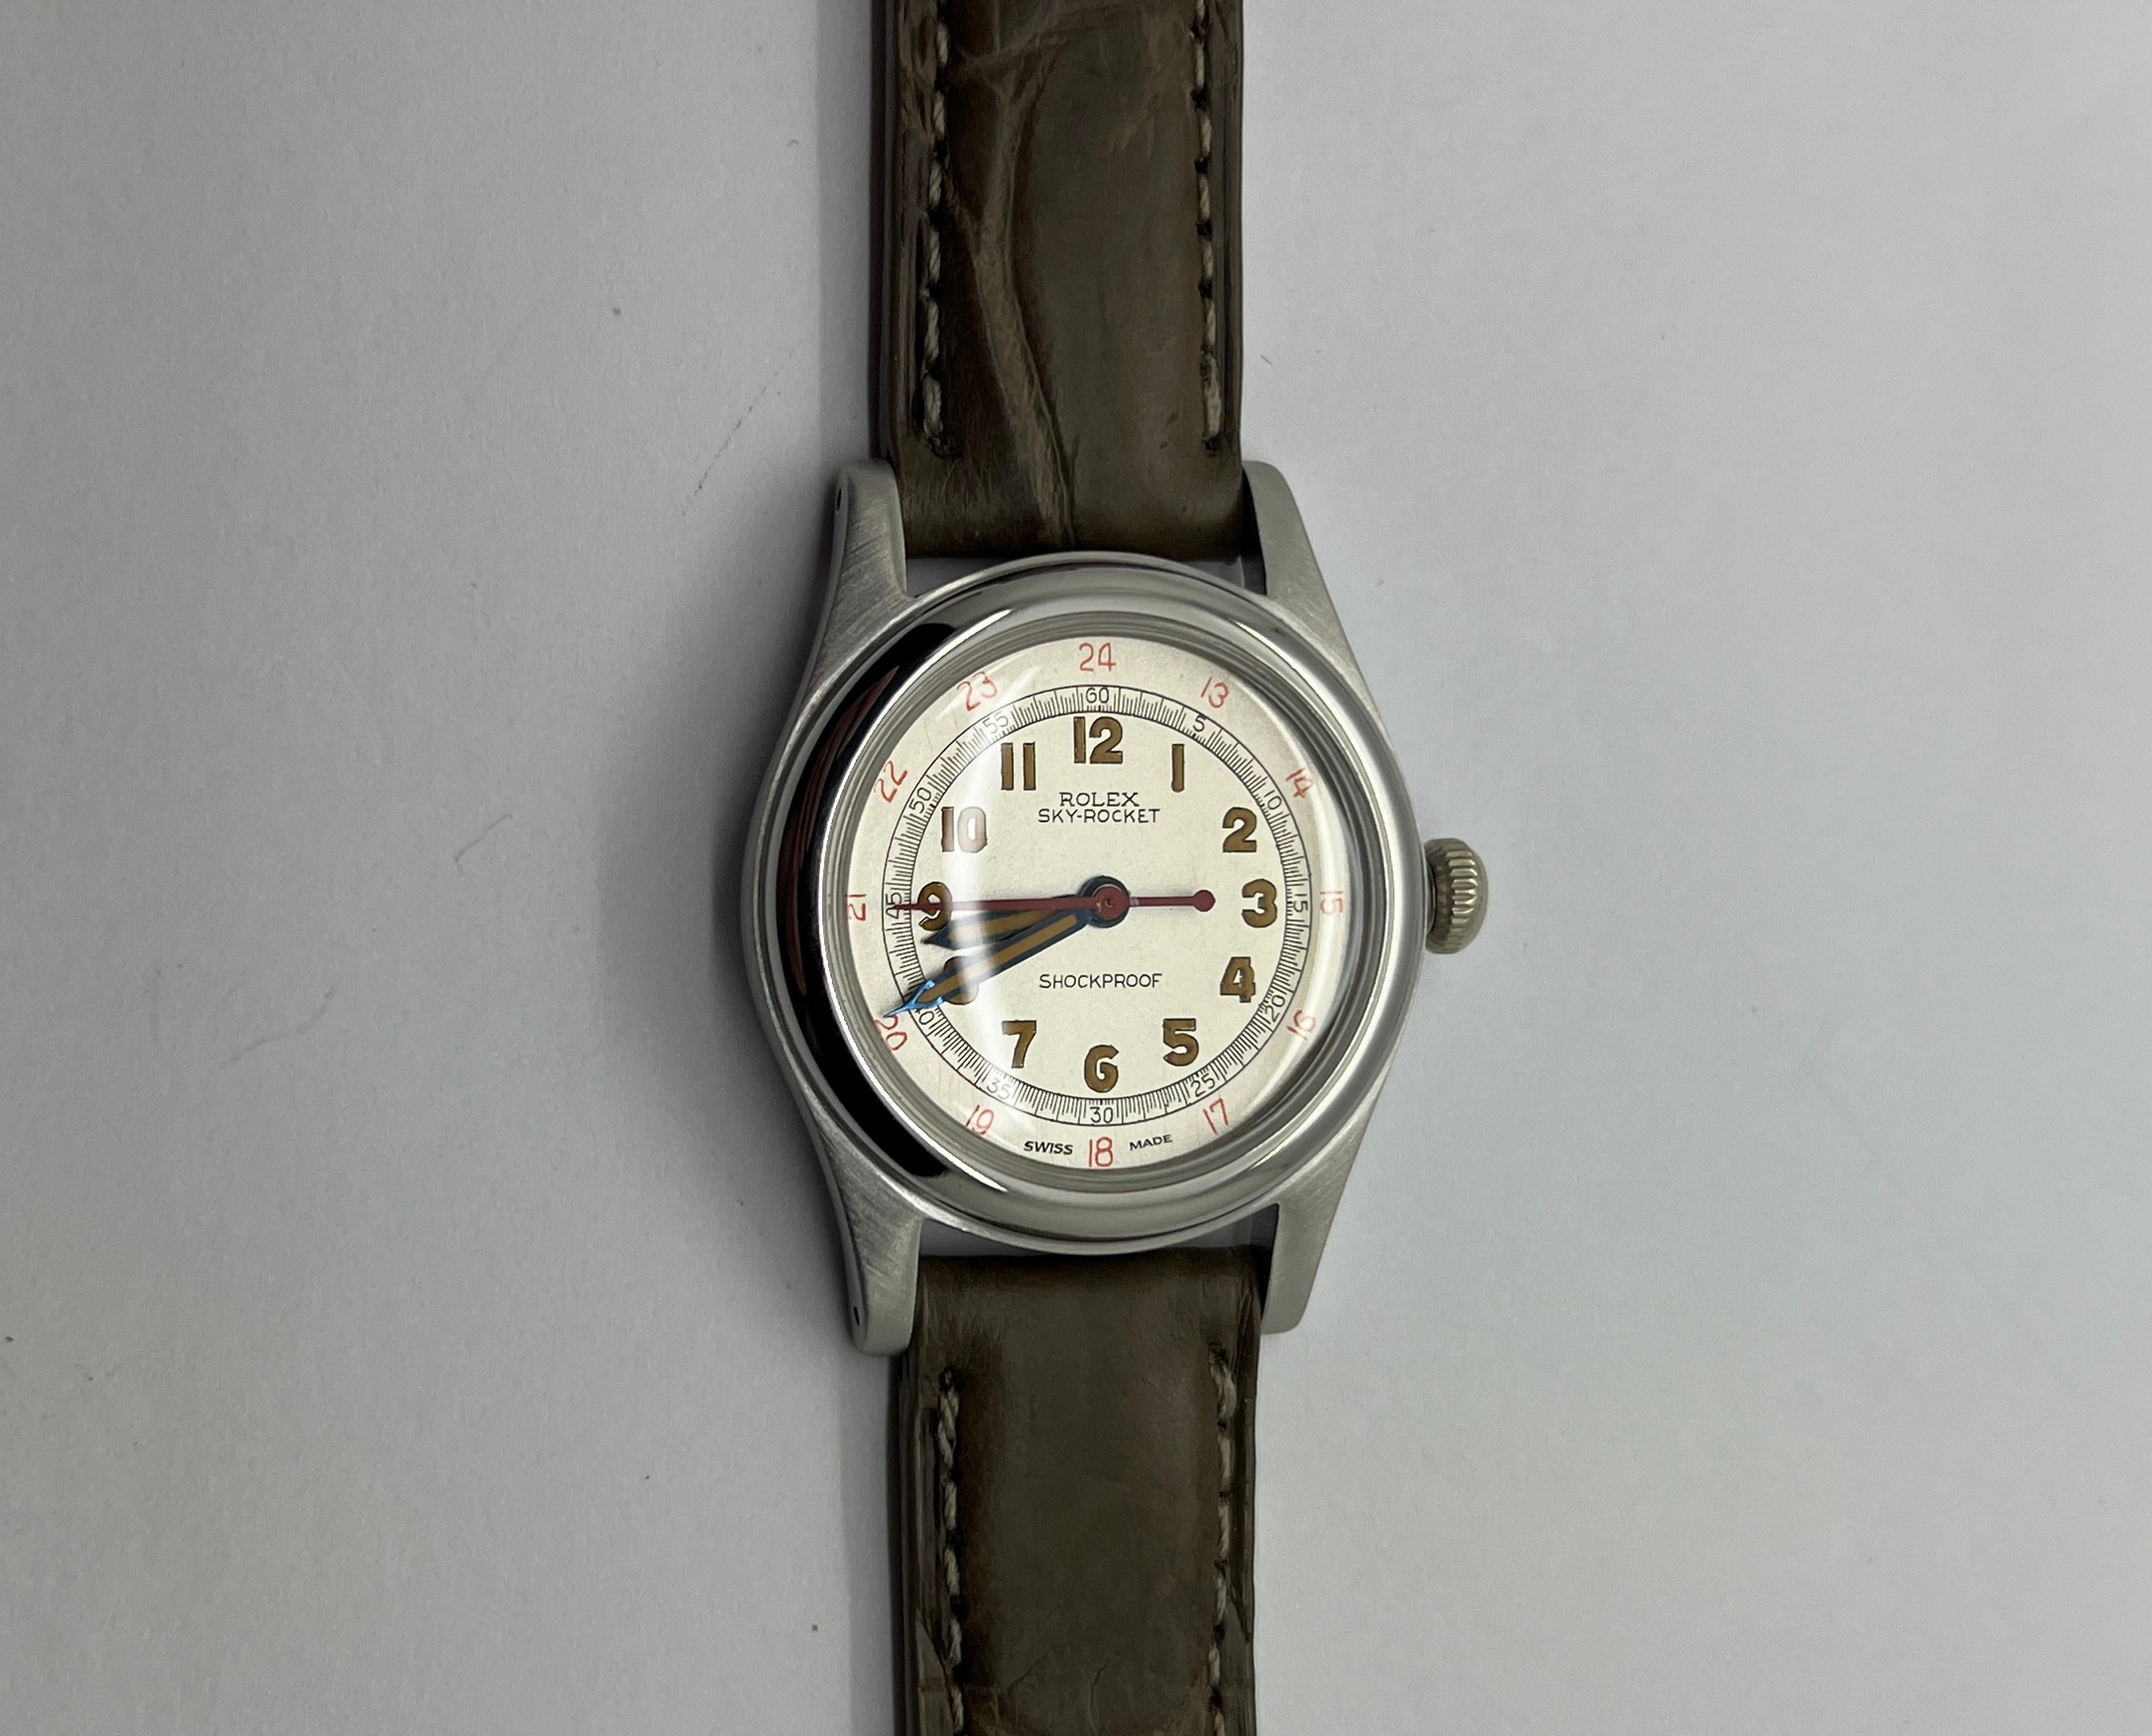 A RARE ROLEX SKYROCKET SHOCKPROOF WATCH FROM THE 1940-1949 PERIOD.

But first a commerical message: Welcome to Vintage watch Corner. As you look through my inventory you will notice I have a soft spot for the “Art Deco” period. This offering is no